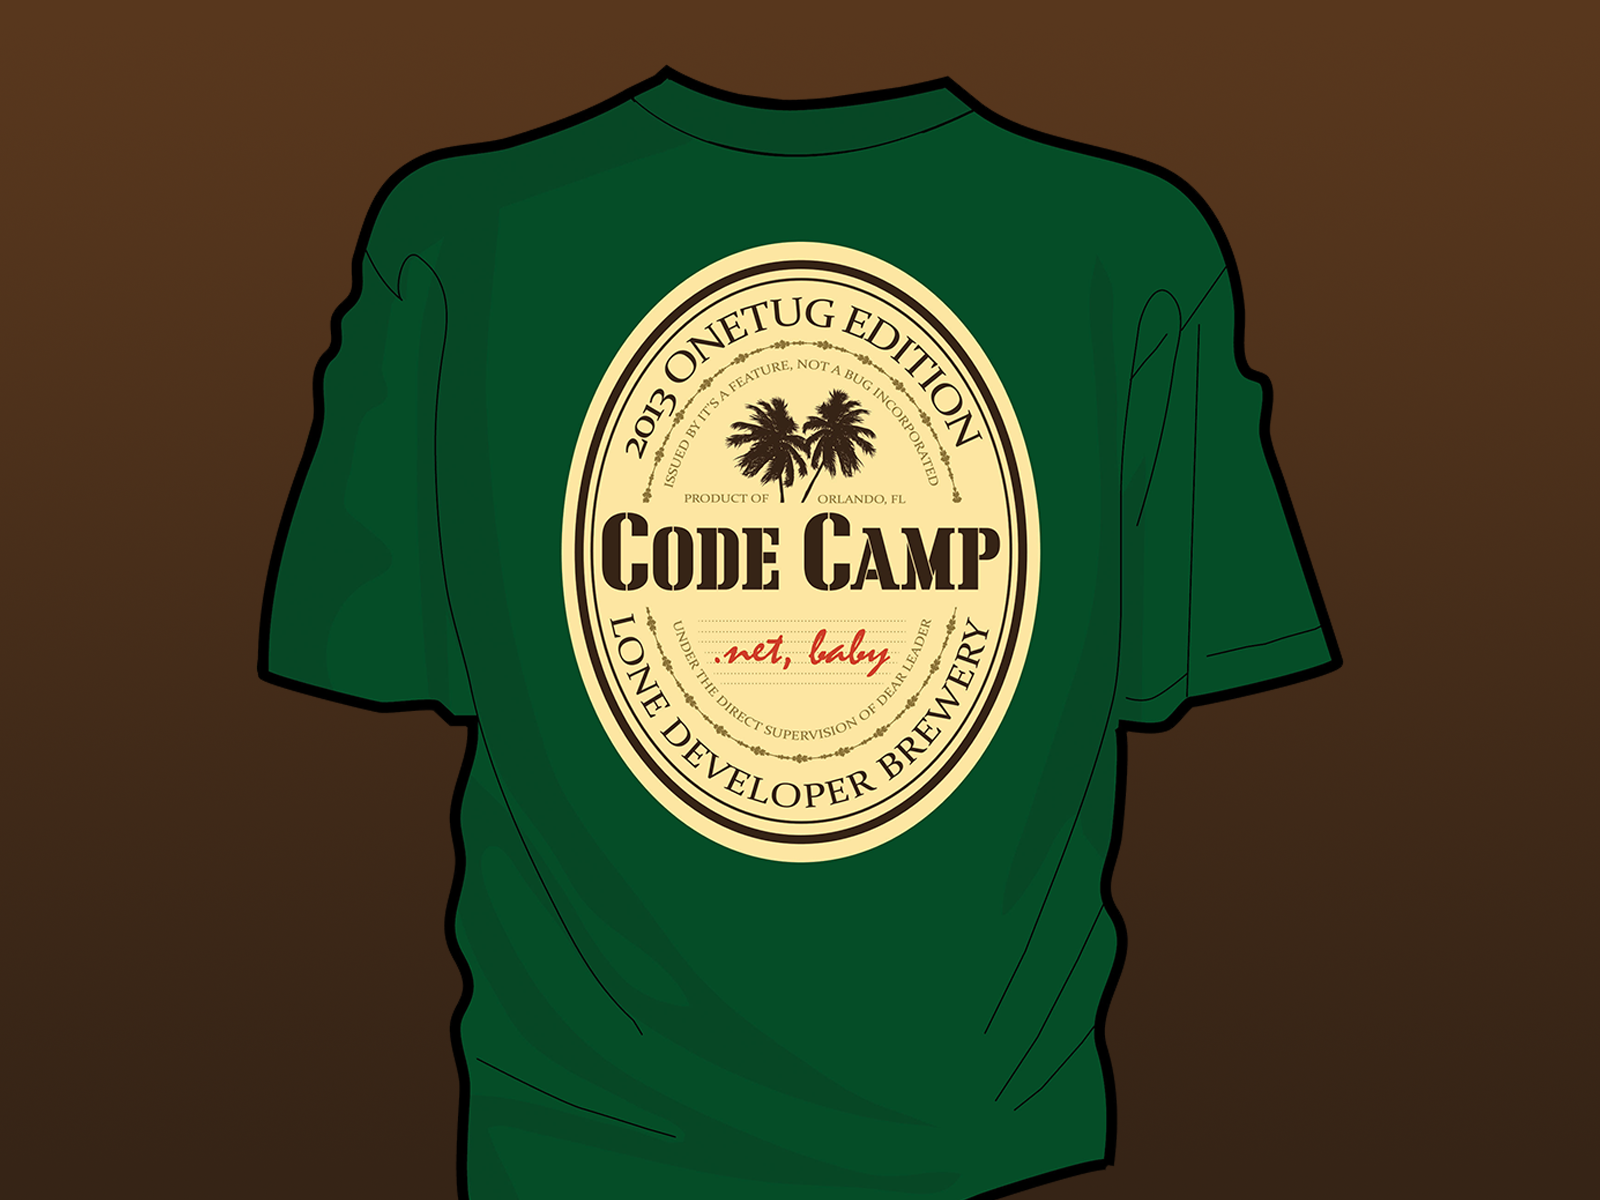 2013 Orlando Code Camp Shirt by Leon Terry on Dribbble